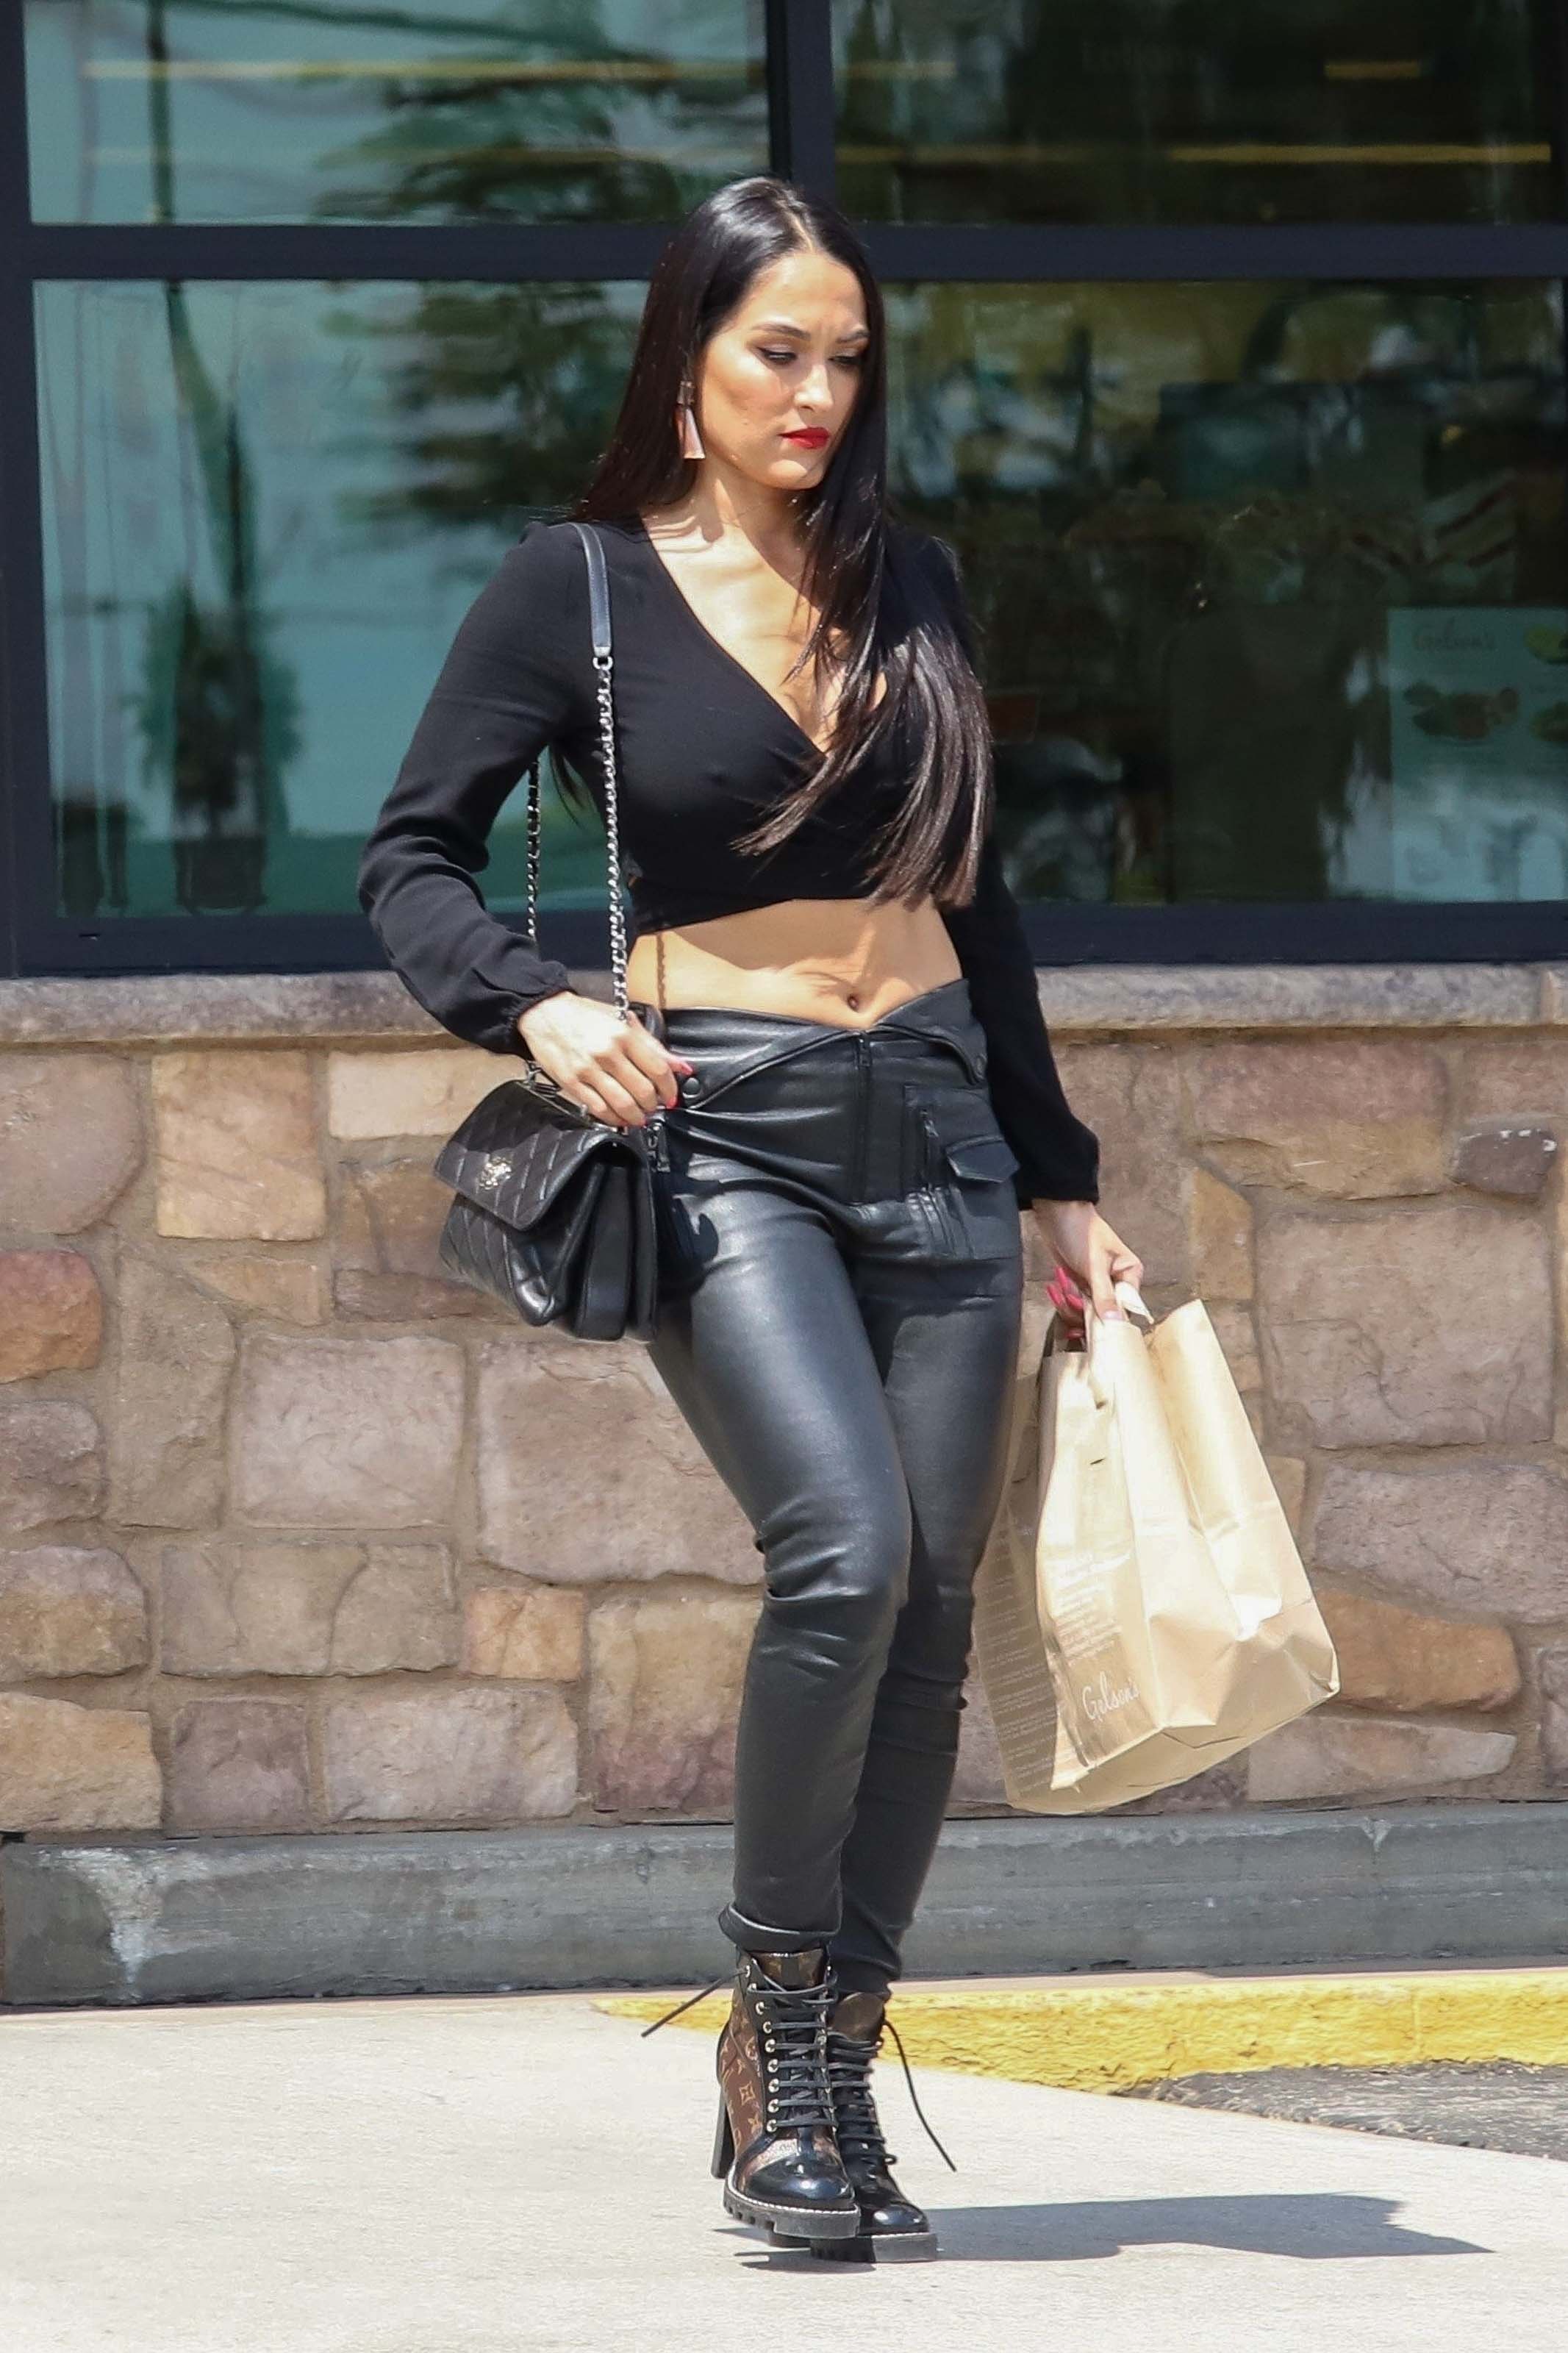 Nikki Bella out and about in Los Feliz